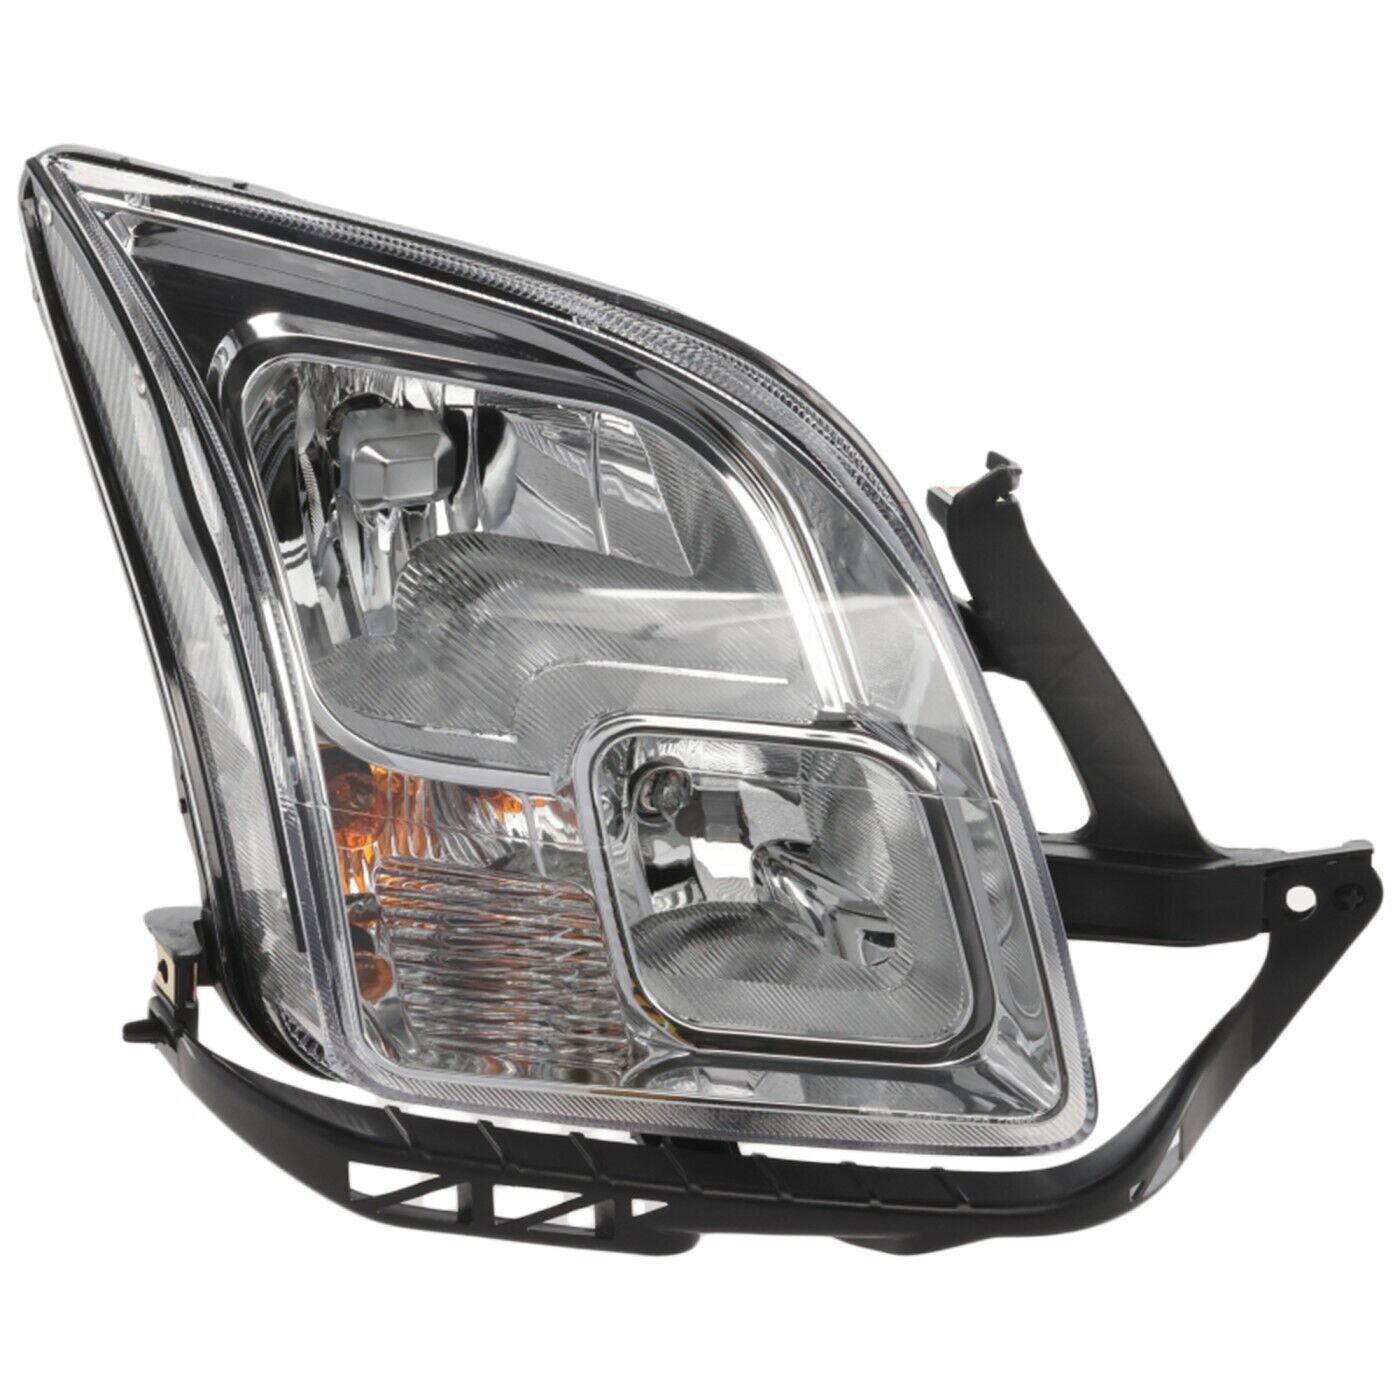 Headlight For 2006 2007 2008 2009 Ford Fusion Right With Bulb